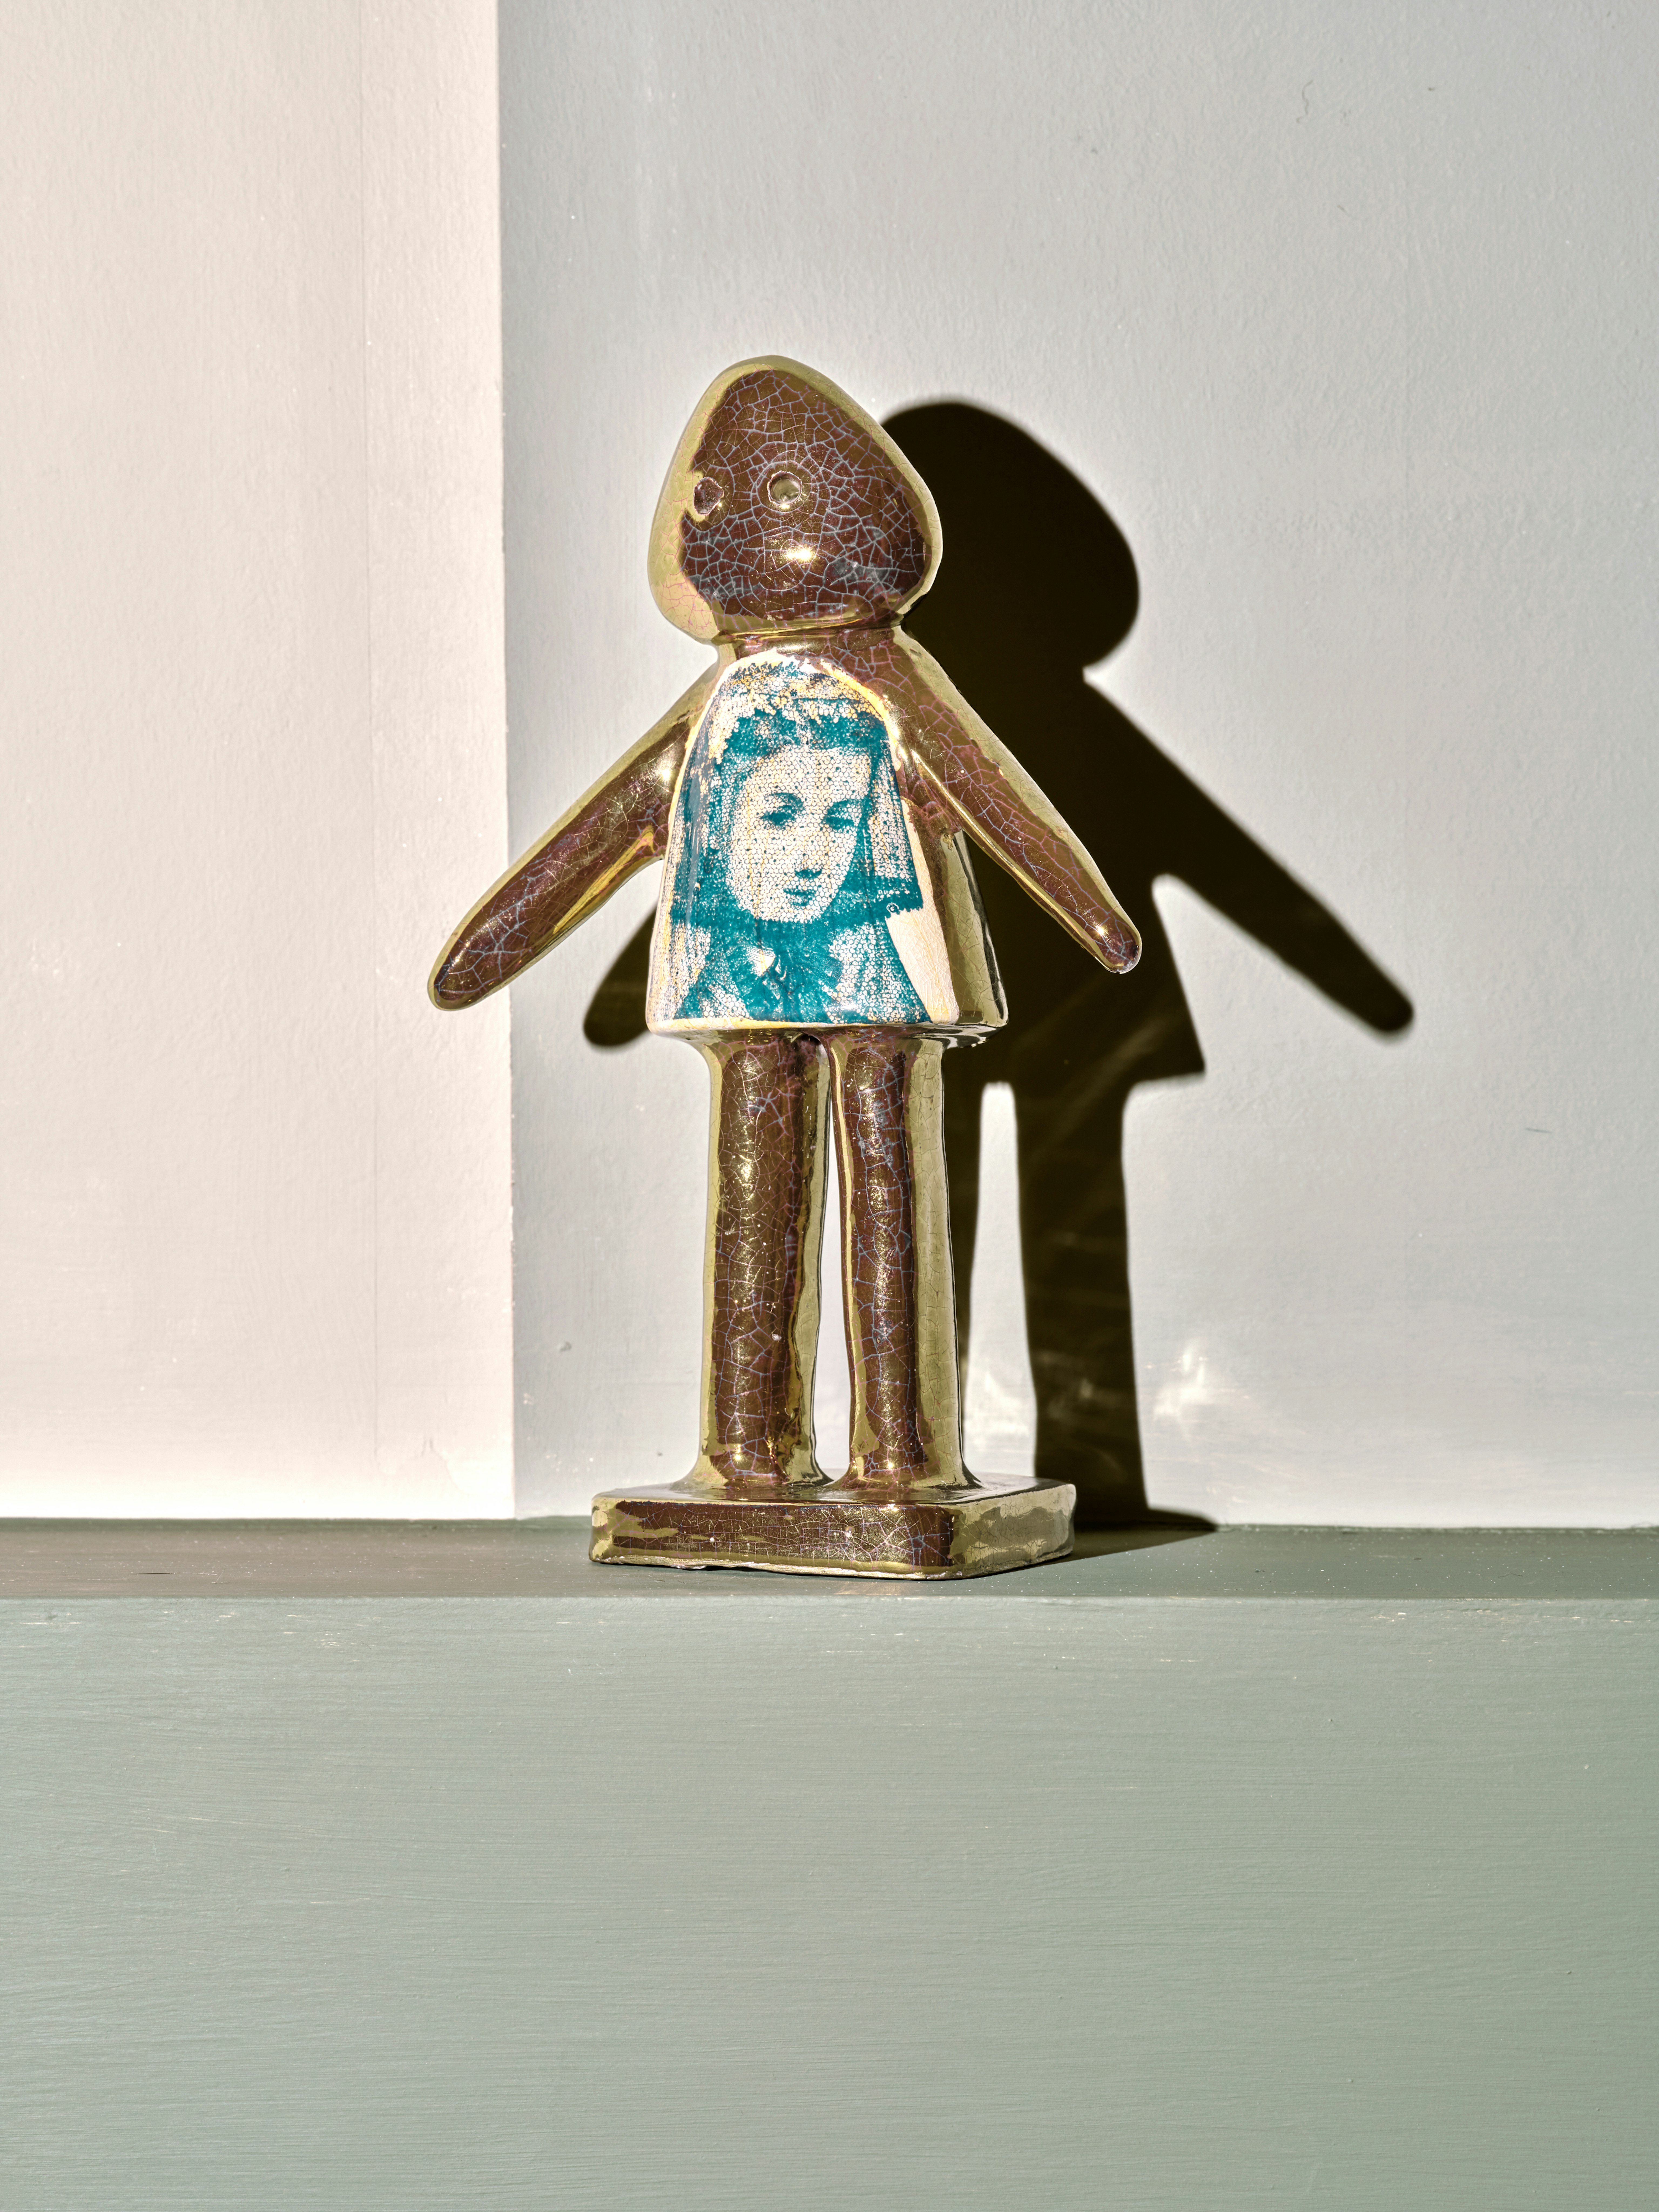 Glazed ceramic gold statuette by Grayson Perry